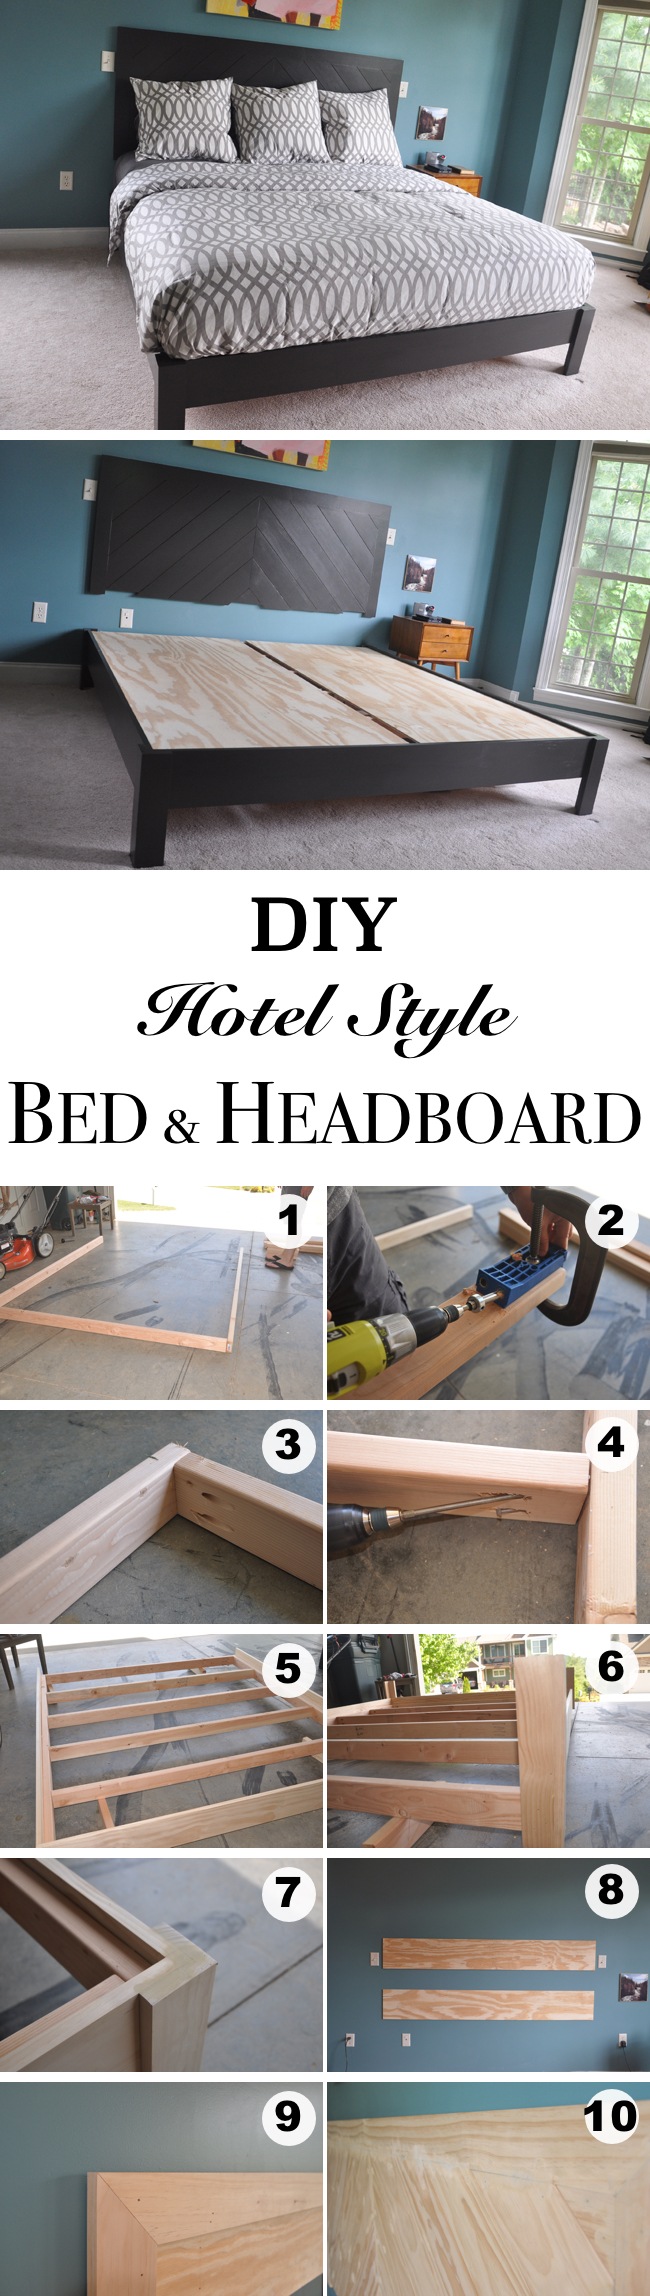 DIY Hotel Style Bed Frame and Headboard